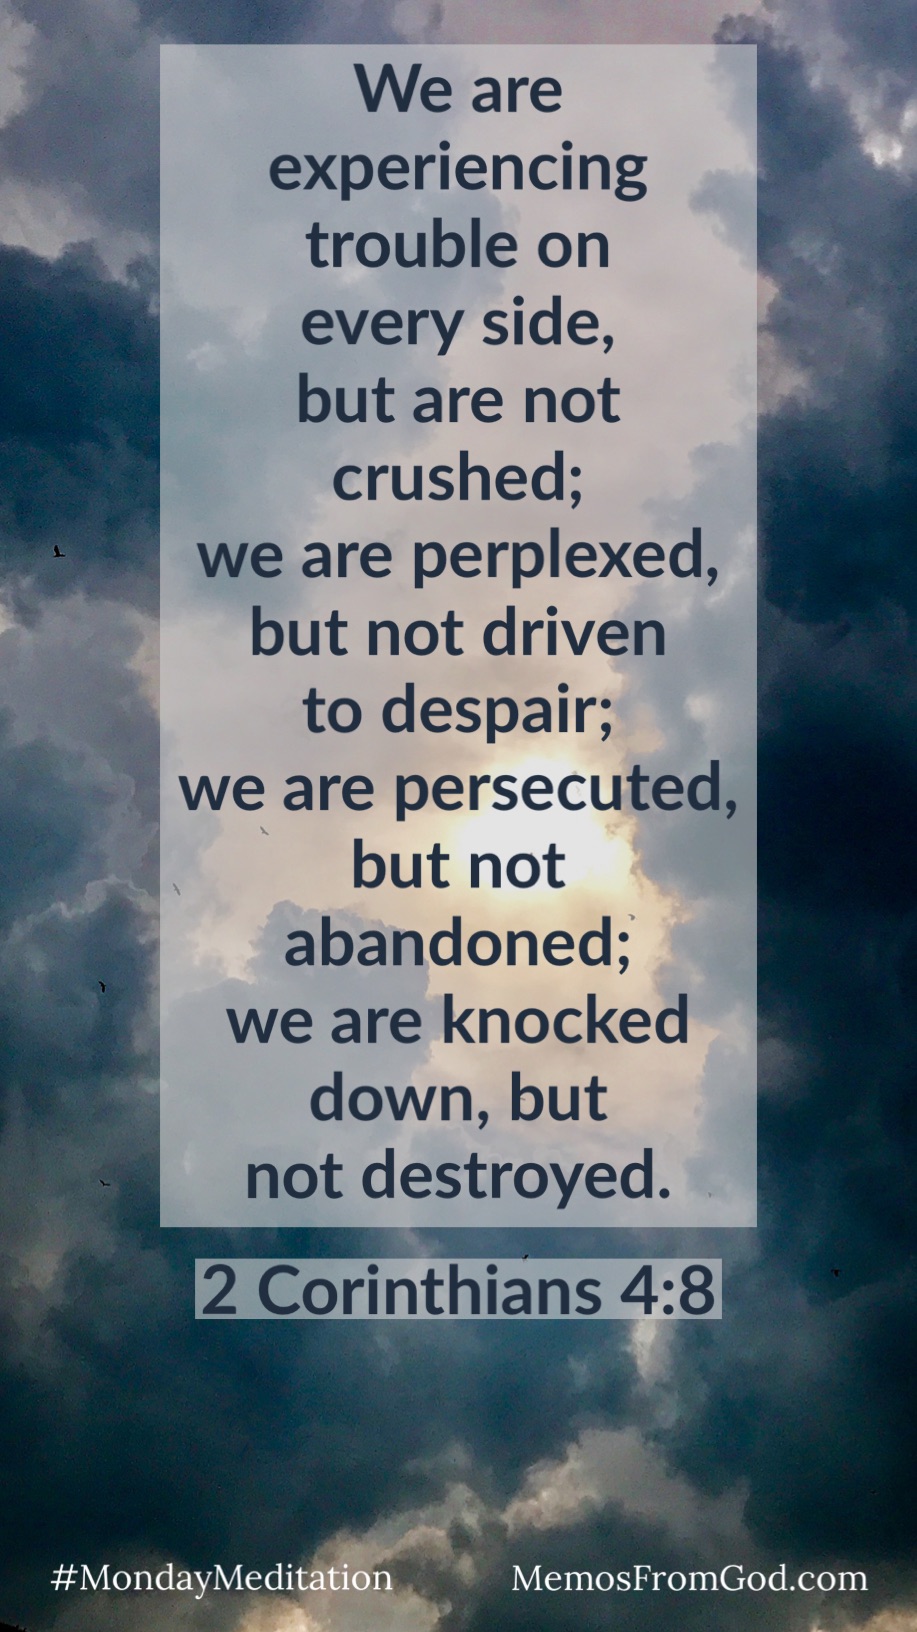 The sun is peeking through a sky filled with dark storm clouds. Caption: We are experiencing trouble on every side, but are not crushed: we are perplexed, but not driven to despair; we are persecuted, but not abandoned; we are knocked down, but not destroyed. 2 Corinthians 4:8